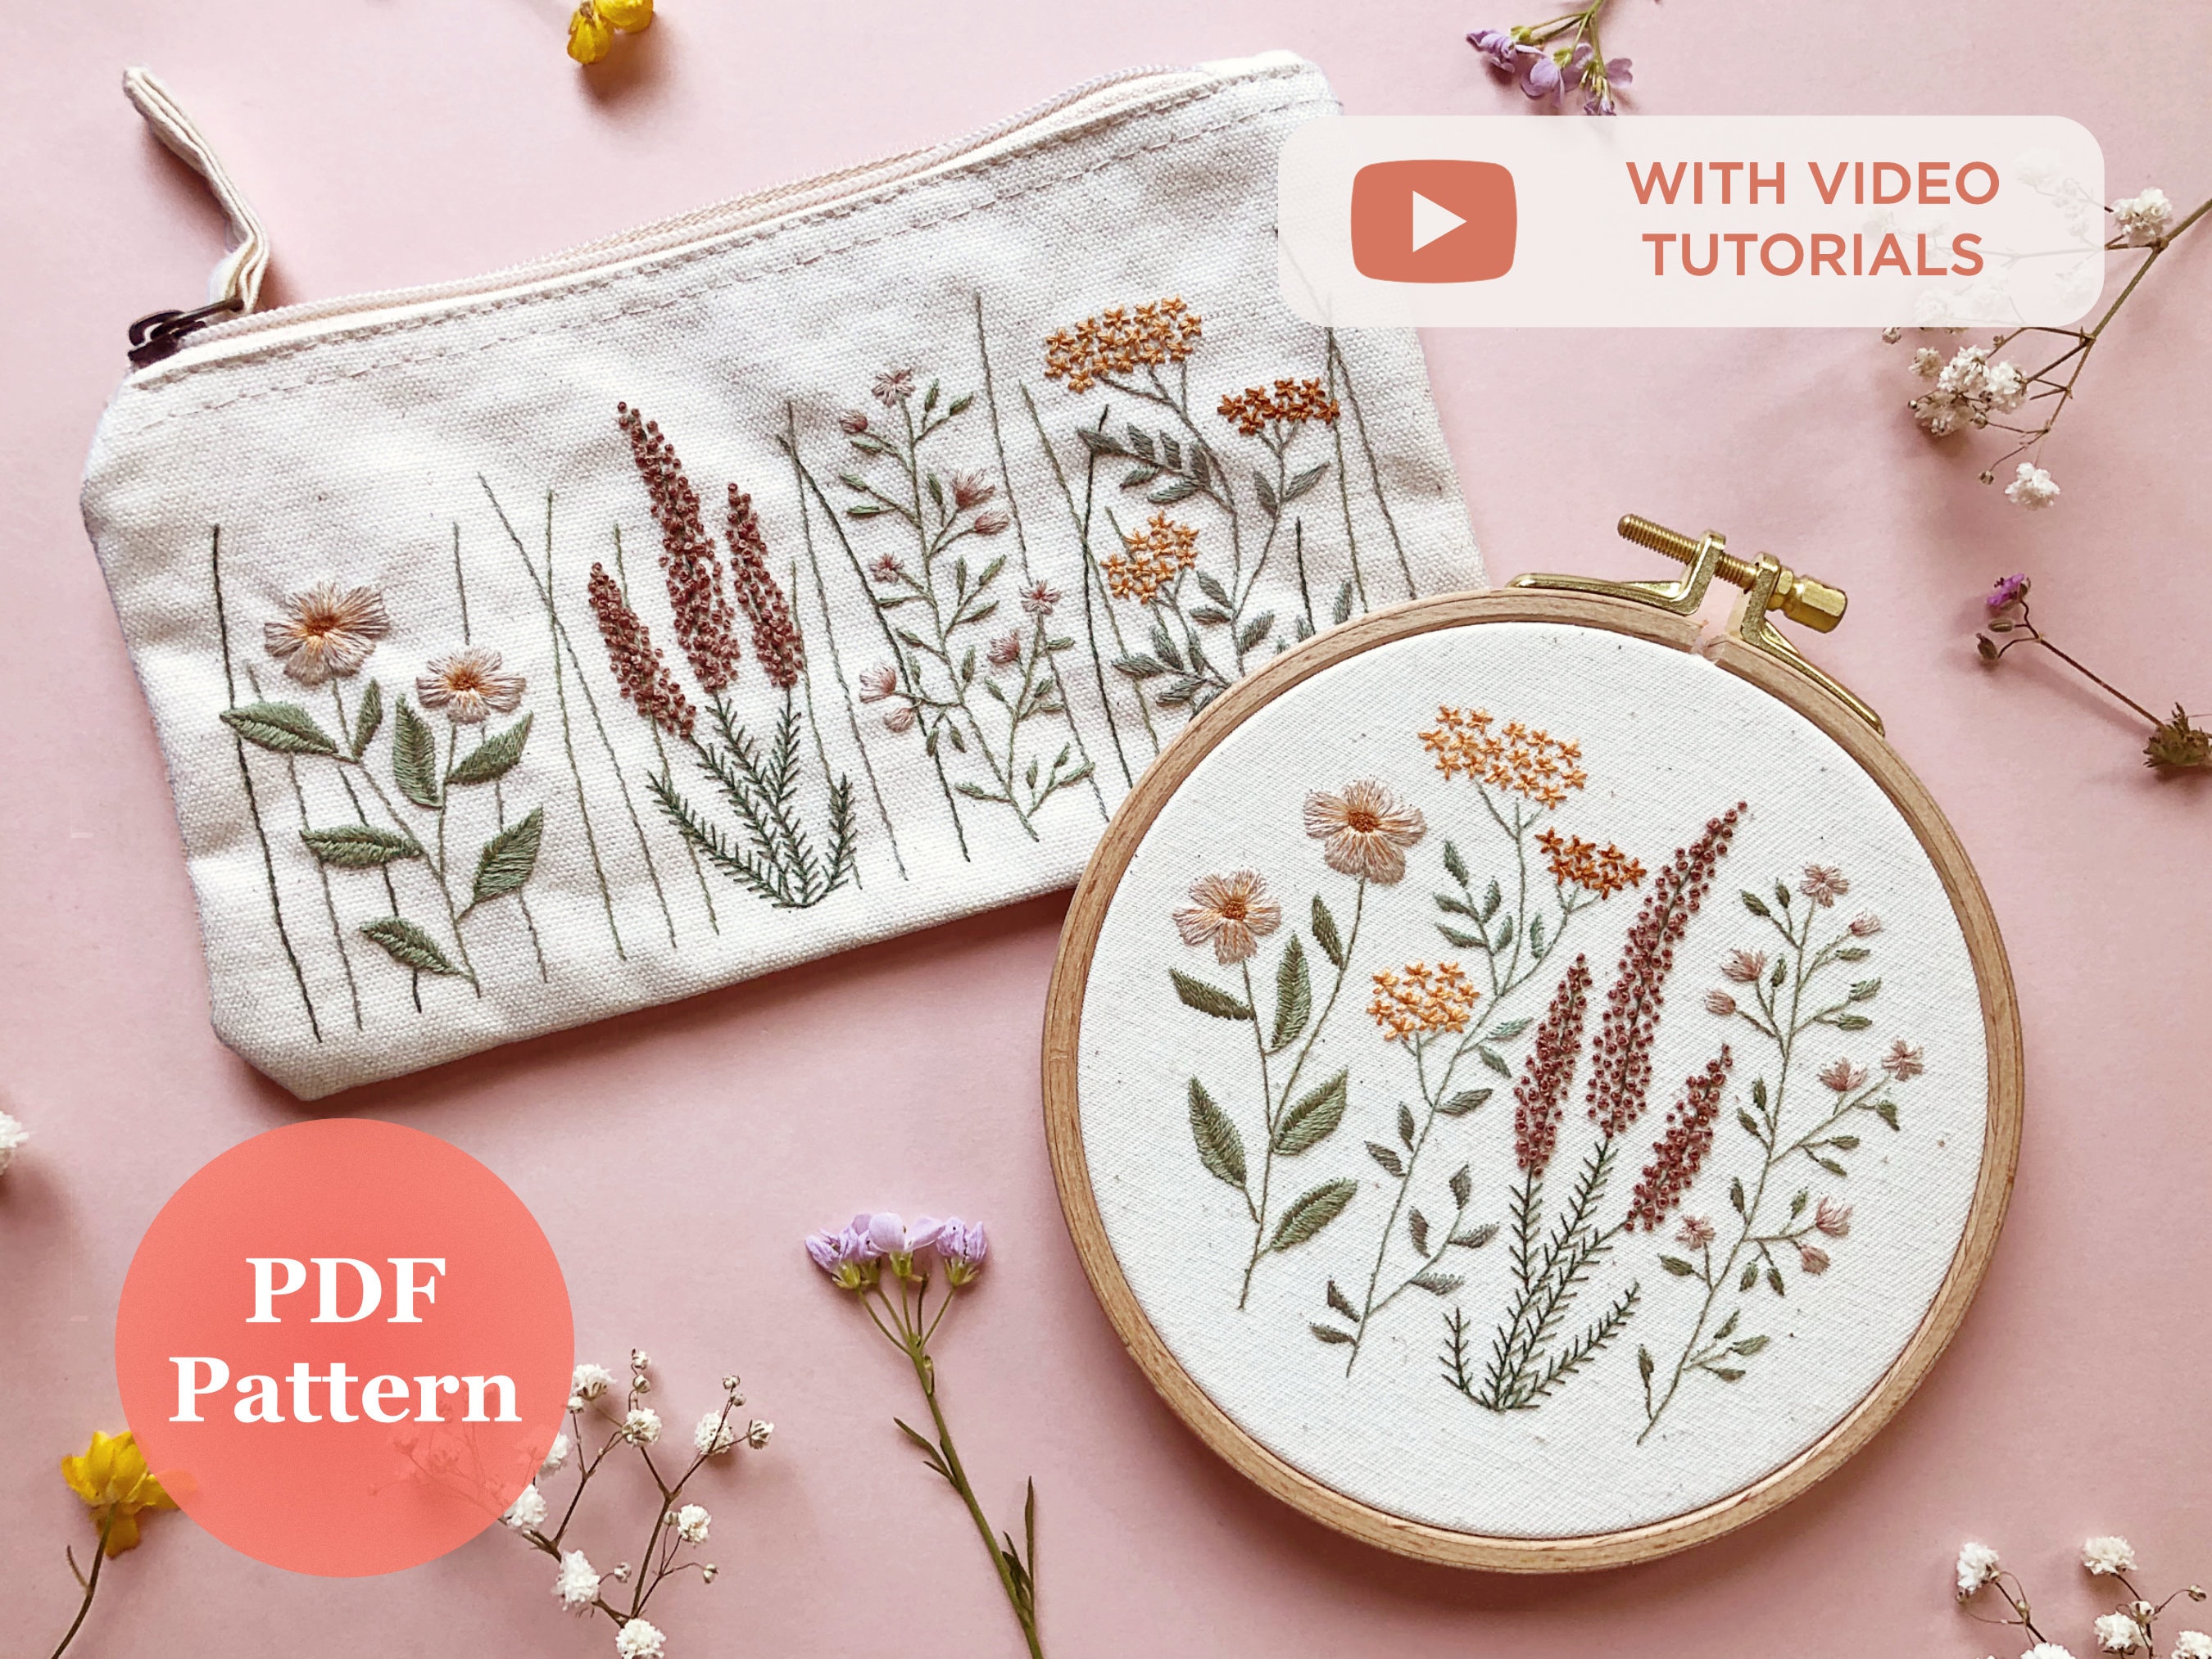 Wildflowers Embroidery Pattern Video Tutorial, Beginner Embroidery PDF  Pattern, Botanical Embroidery Designs 